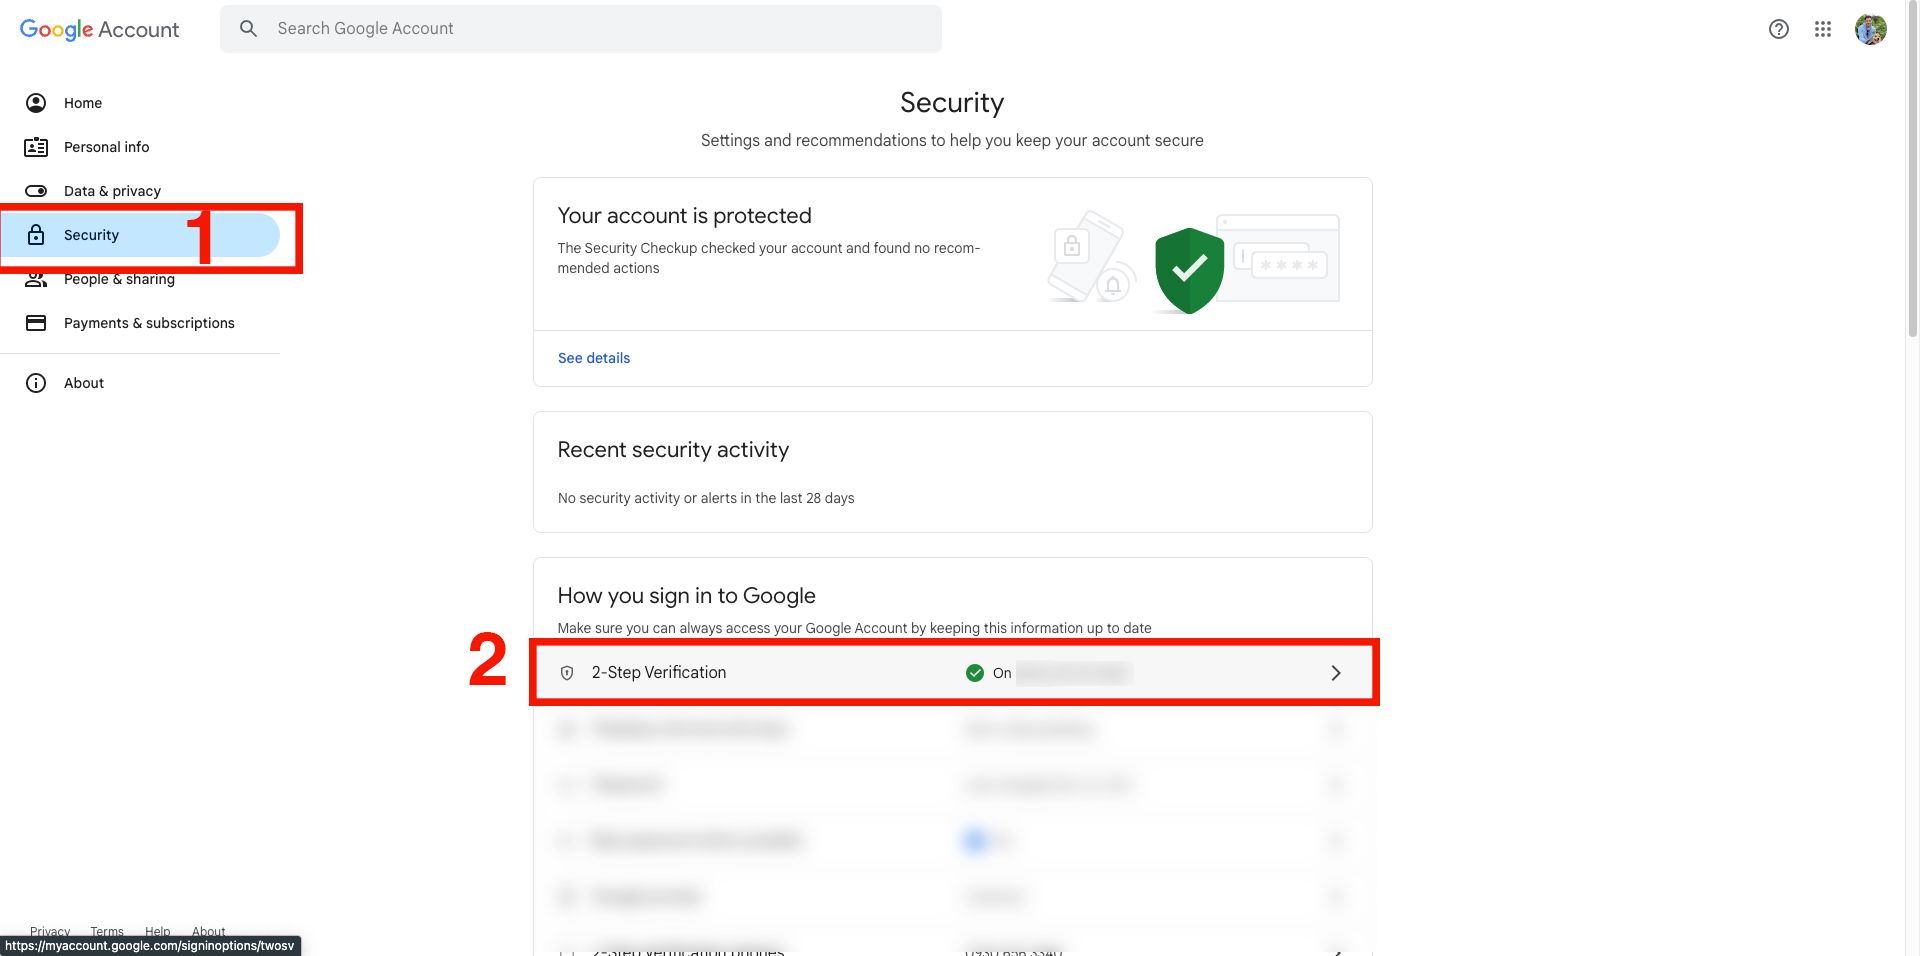 Google Account Security settings page showing 2-Step Verification is enabled.